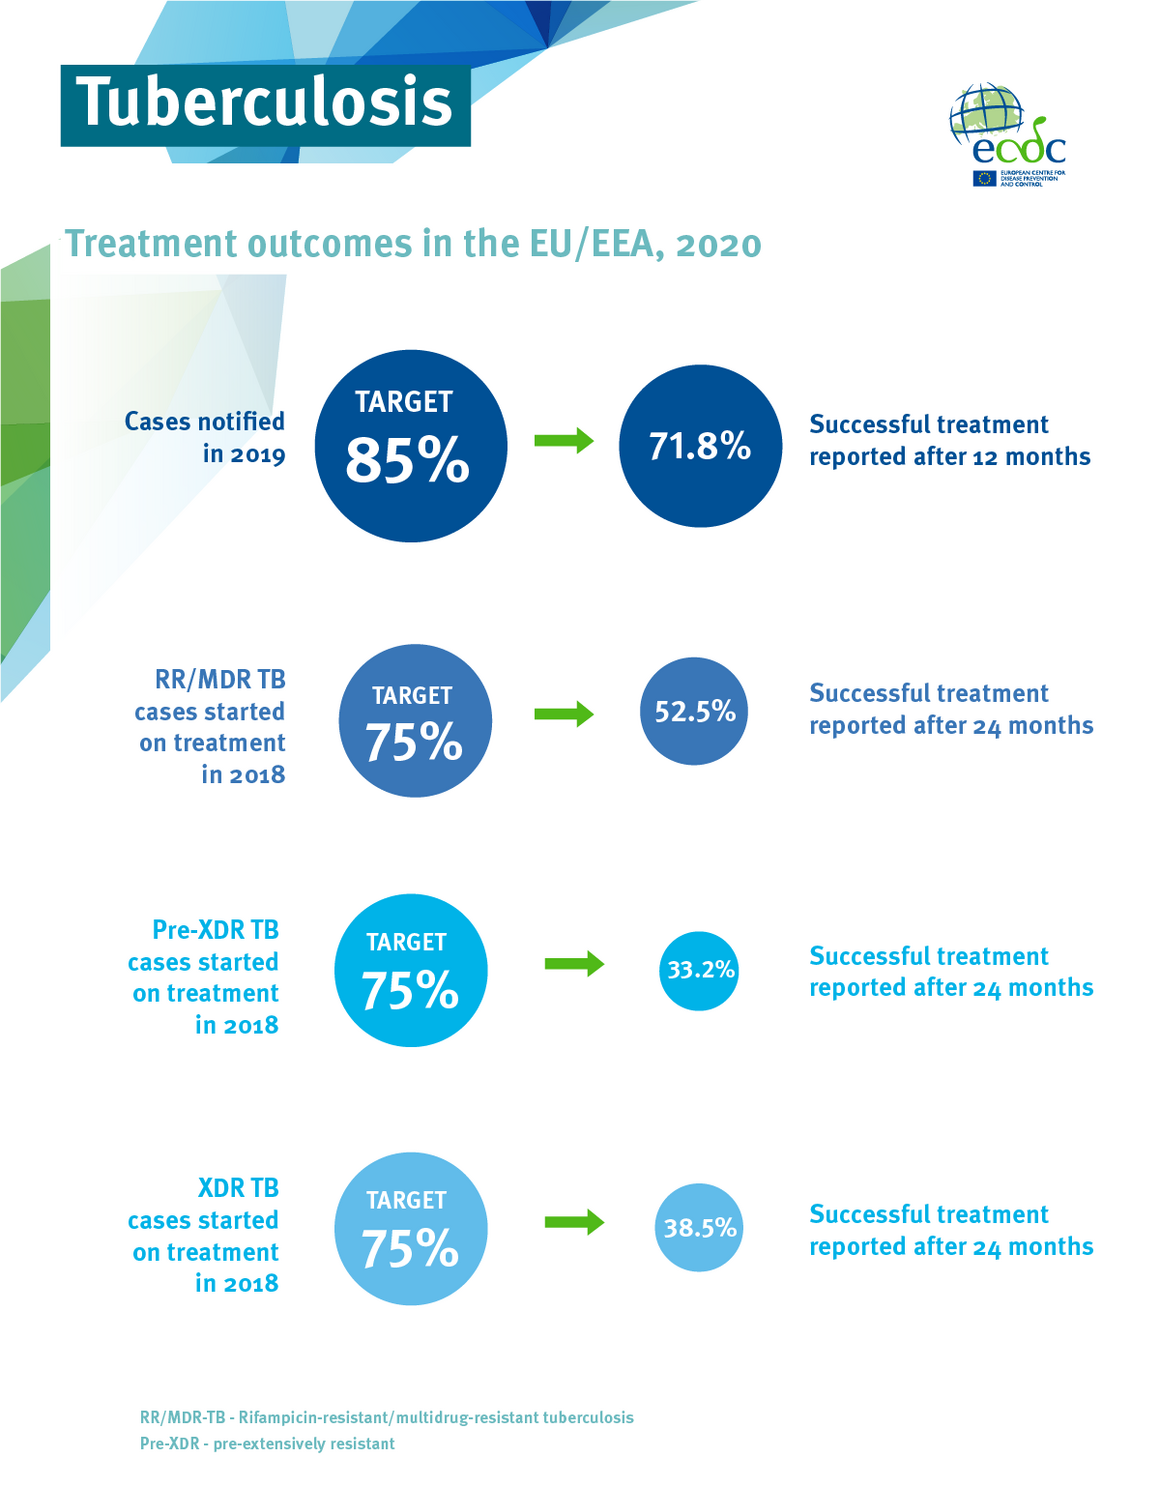 Infographic: Tuberculosis treatment outcomes in the EU/EEA, 2020